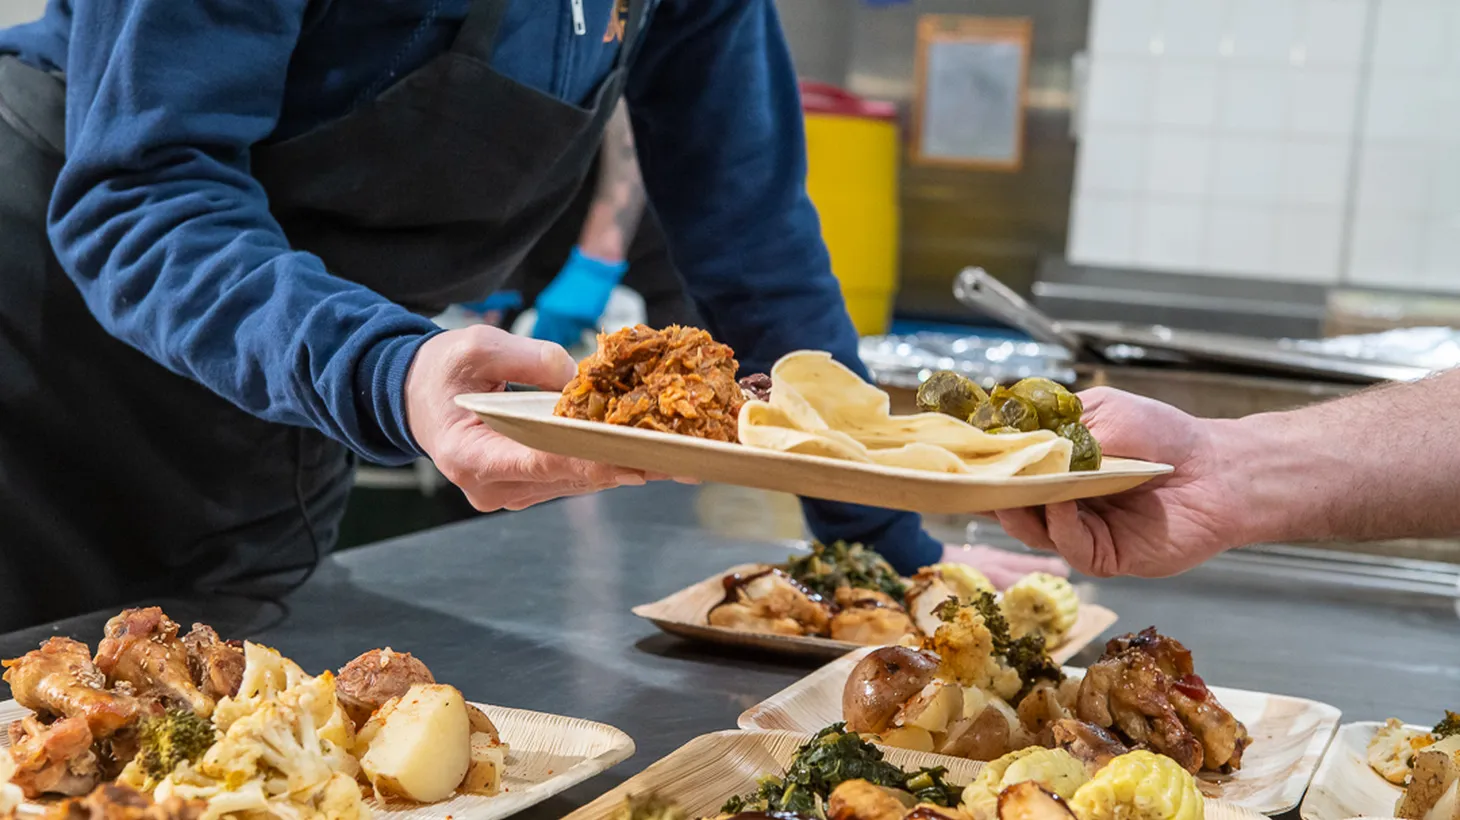 The Hollywood Food Coalition Community Dinner has served hot, healthy meals to people who need it in Hollywood every night of the year since 1987.